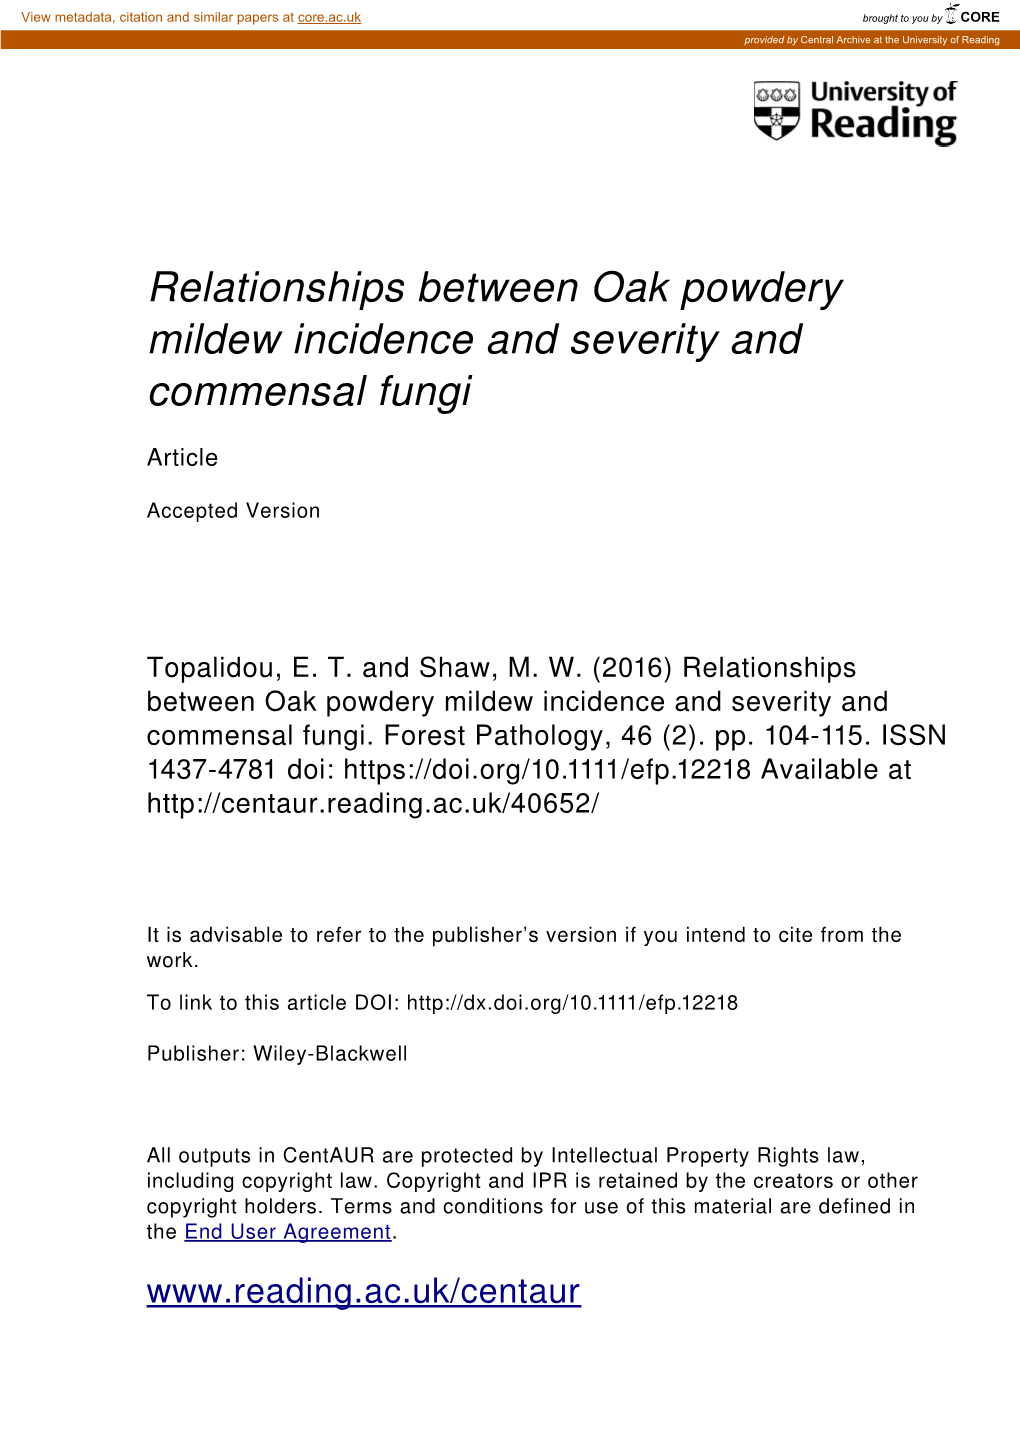 Relationships Between Oak Powdery Mildew Incidence and Severity and Commensal Fungi